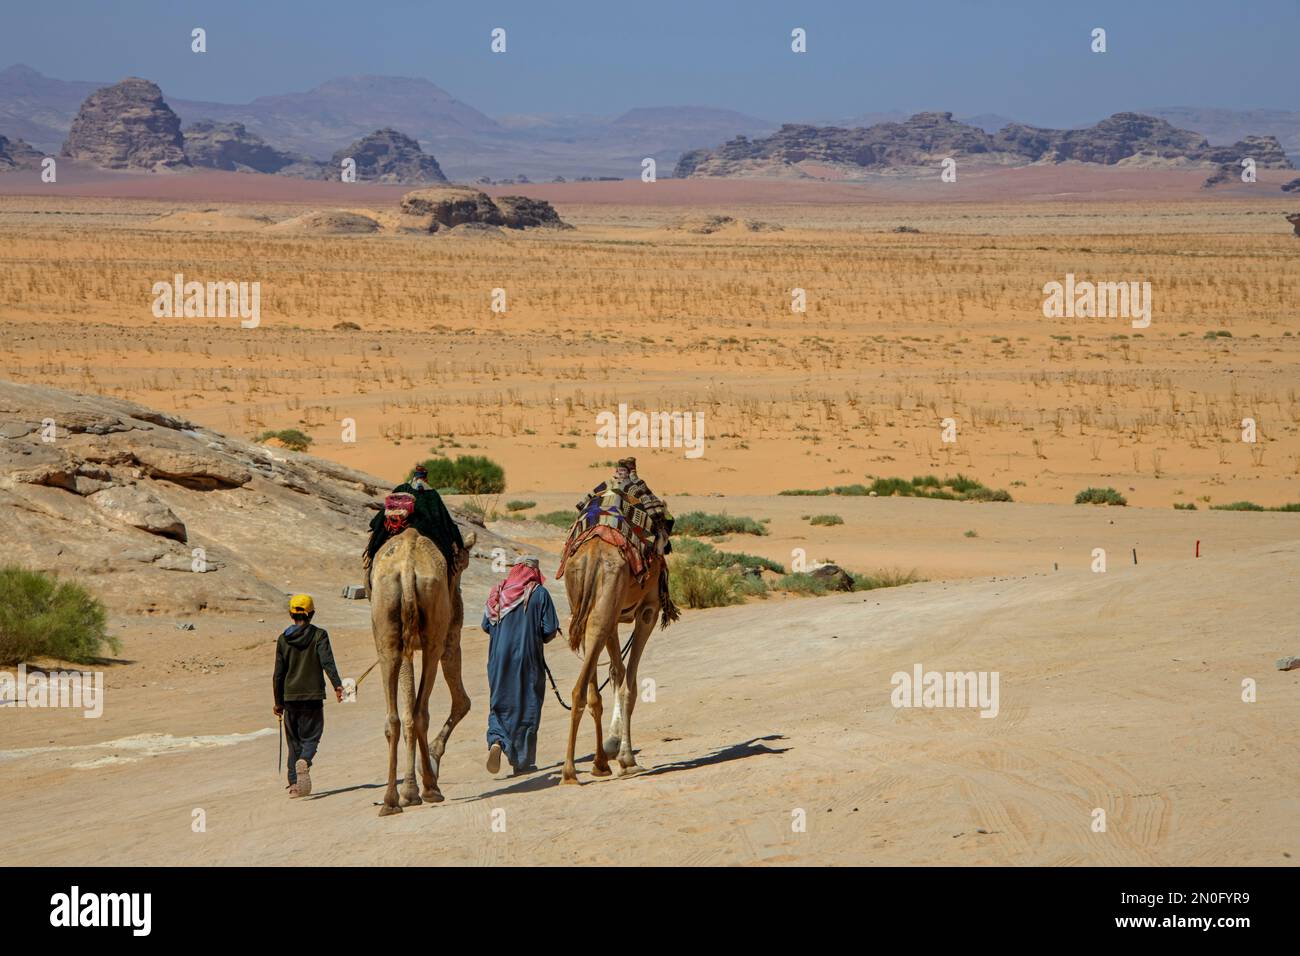 A man and a boy walking beside the camels in the beautiful landscape of the desert Stock Photo